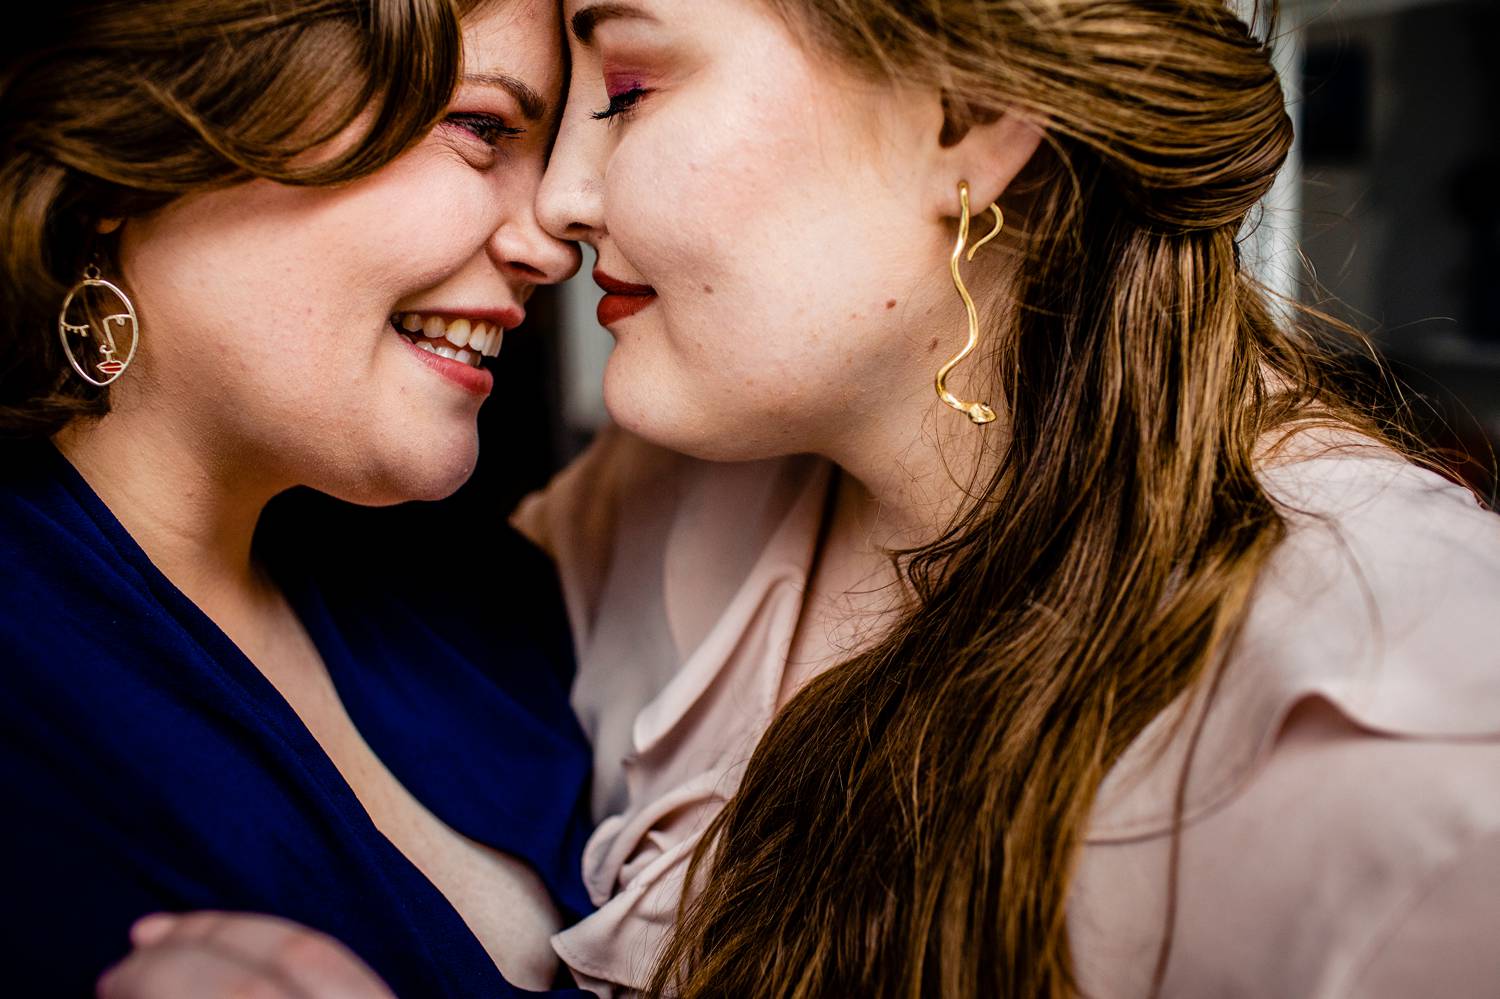 Two women move in to kiss in this close-up photograph from their engagement session